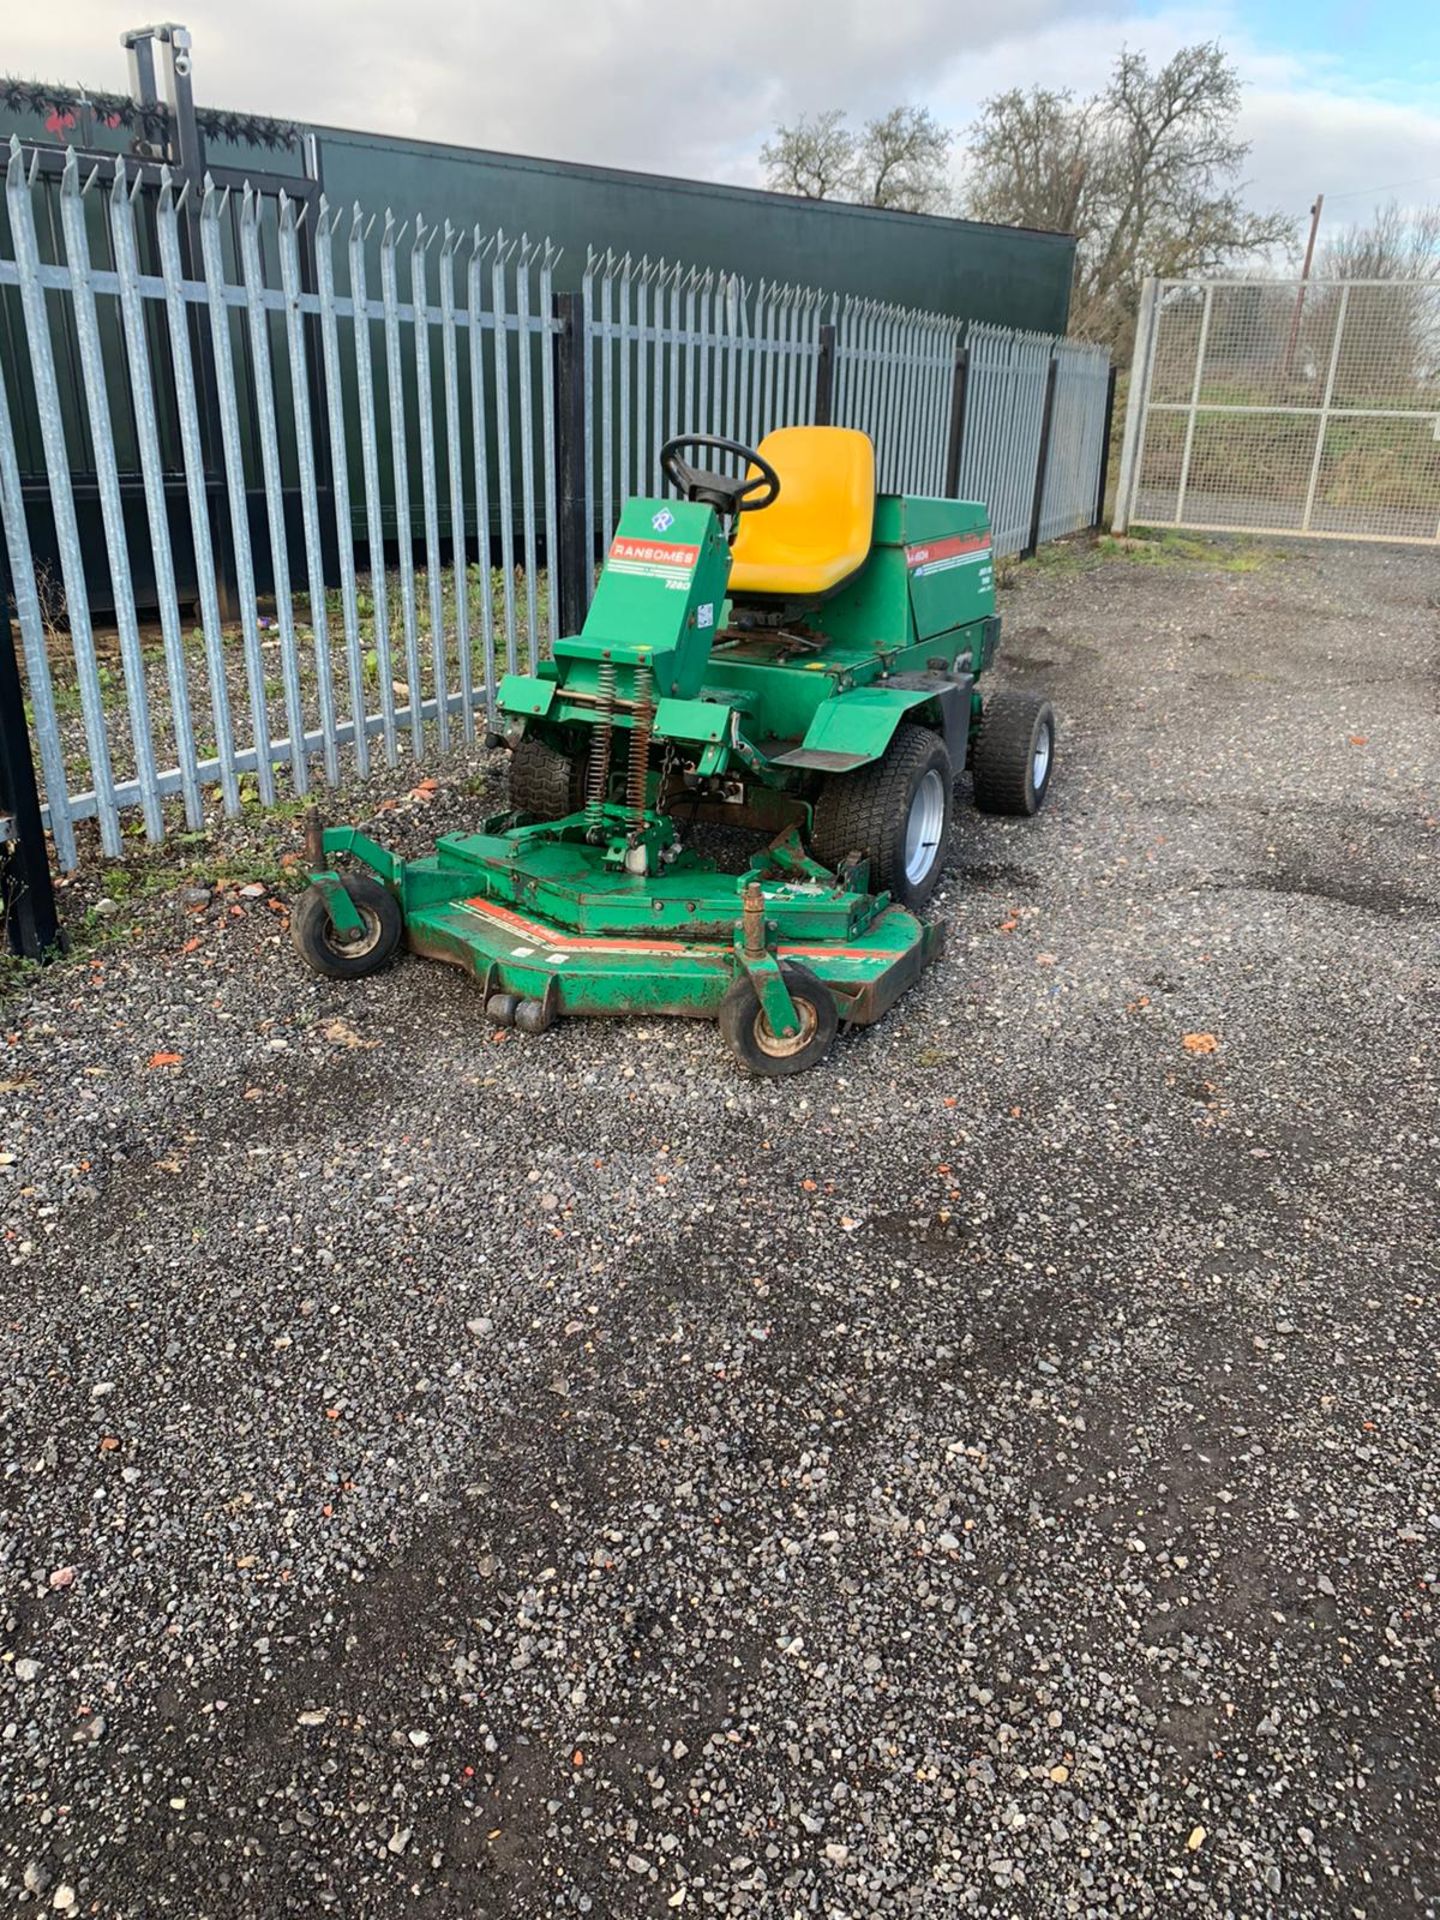 RANSOMES FRONTLINE 728D 4 WHEEL DRIVE DIESEL ROTARY MOWER OUTFRONT DECK 4WD *PLUS VAT* - Image 5 of 10